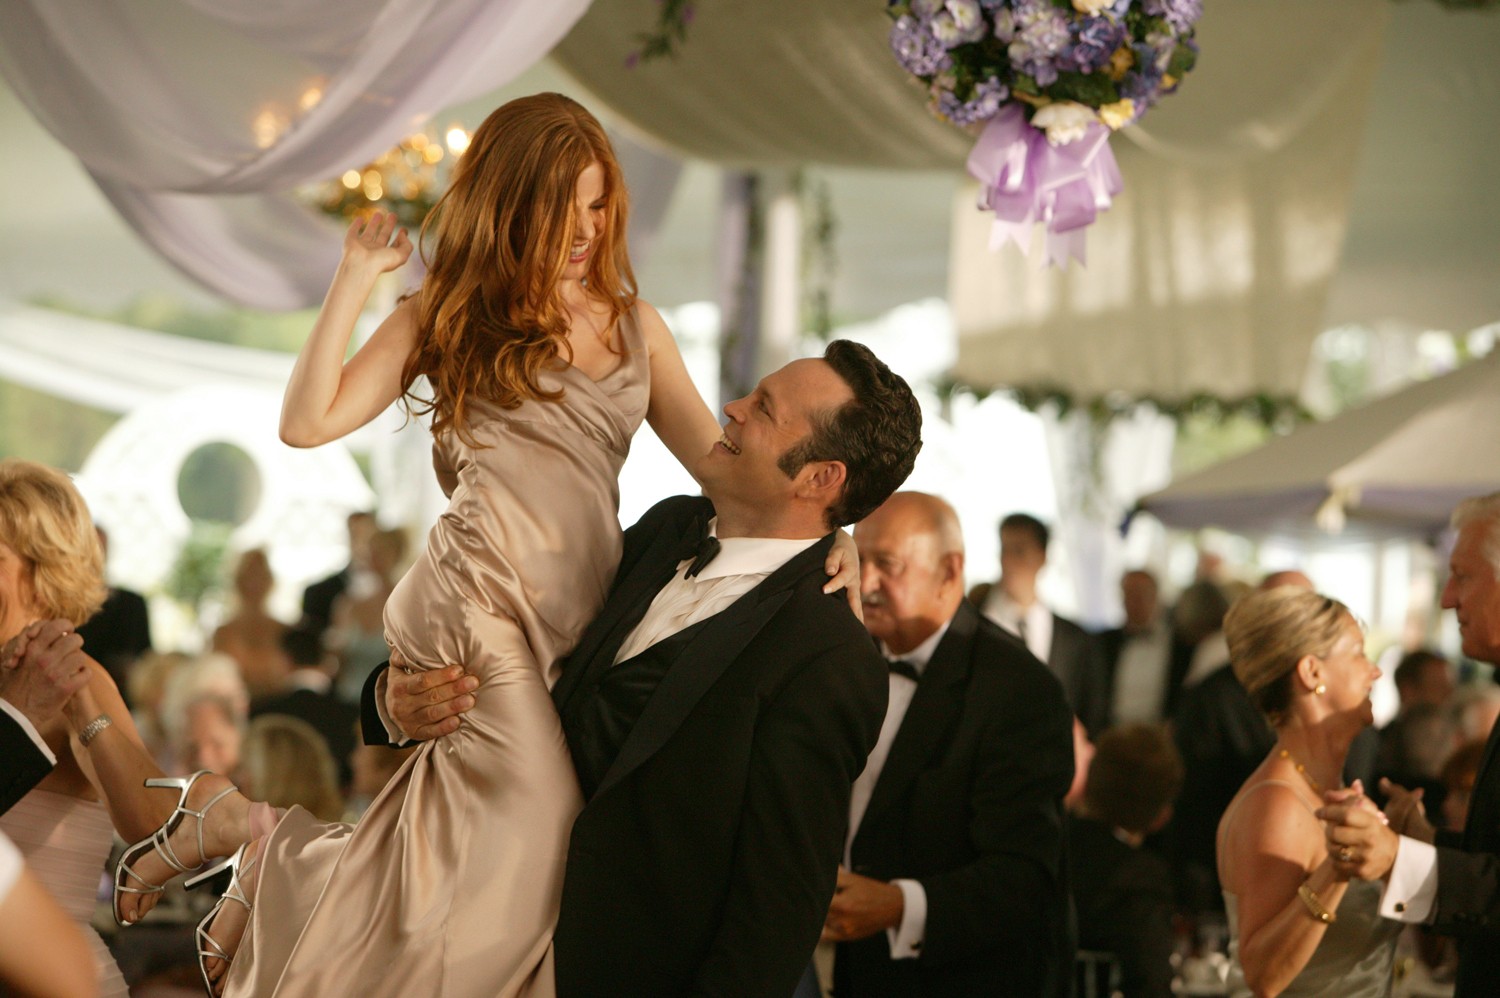 Isla Fisher and Vince Vaughn